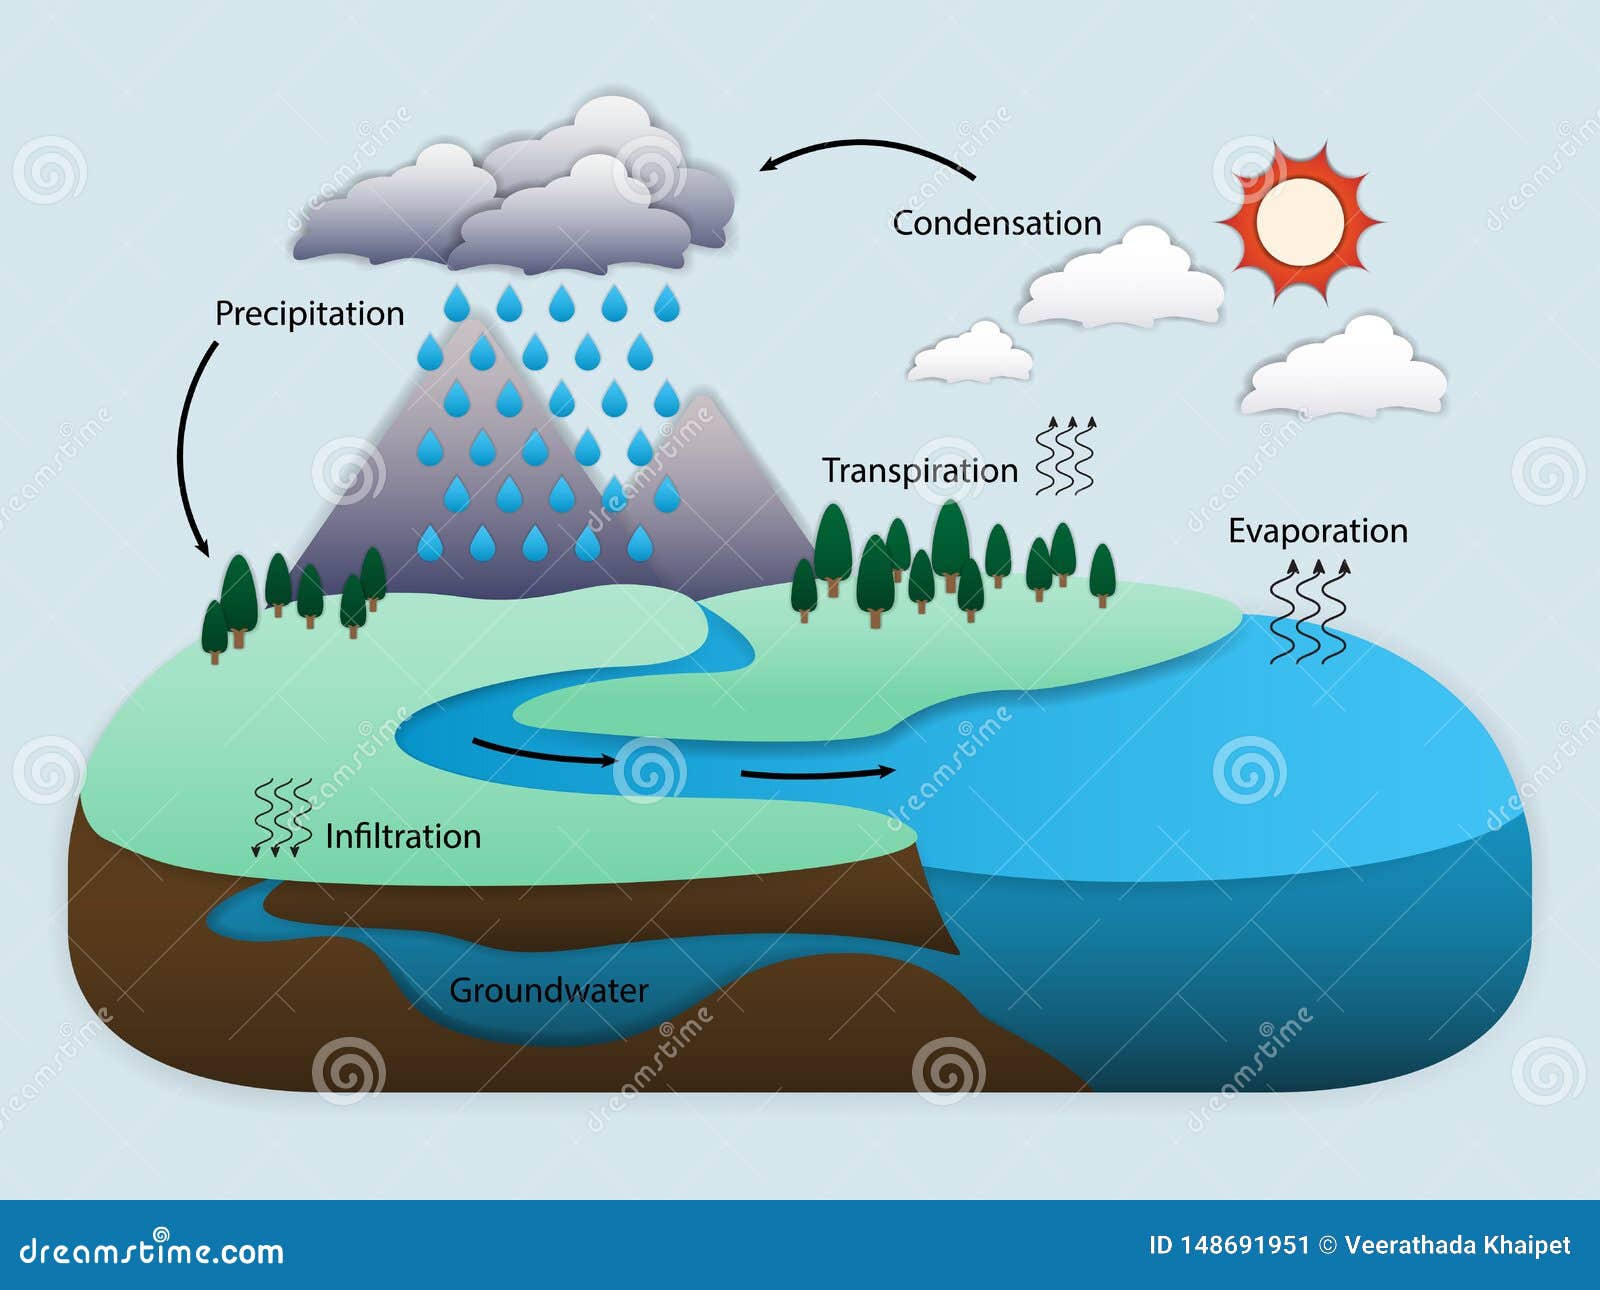 DP Environmental Systems & Societies: 4.1 The Hydrological Cycle Challenge